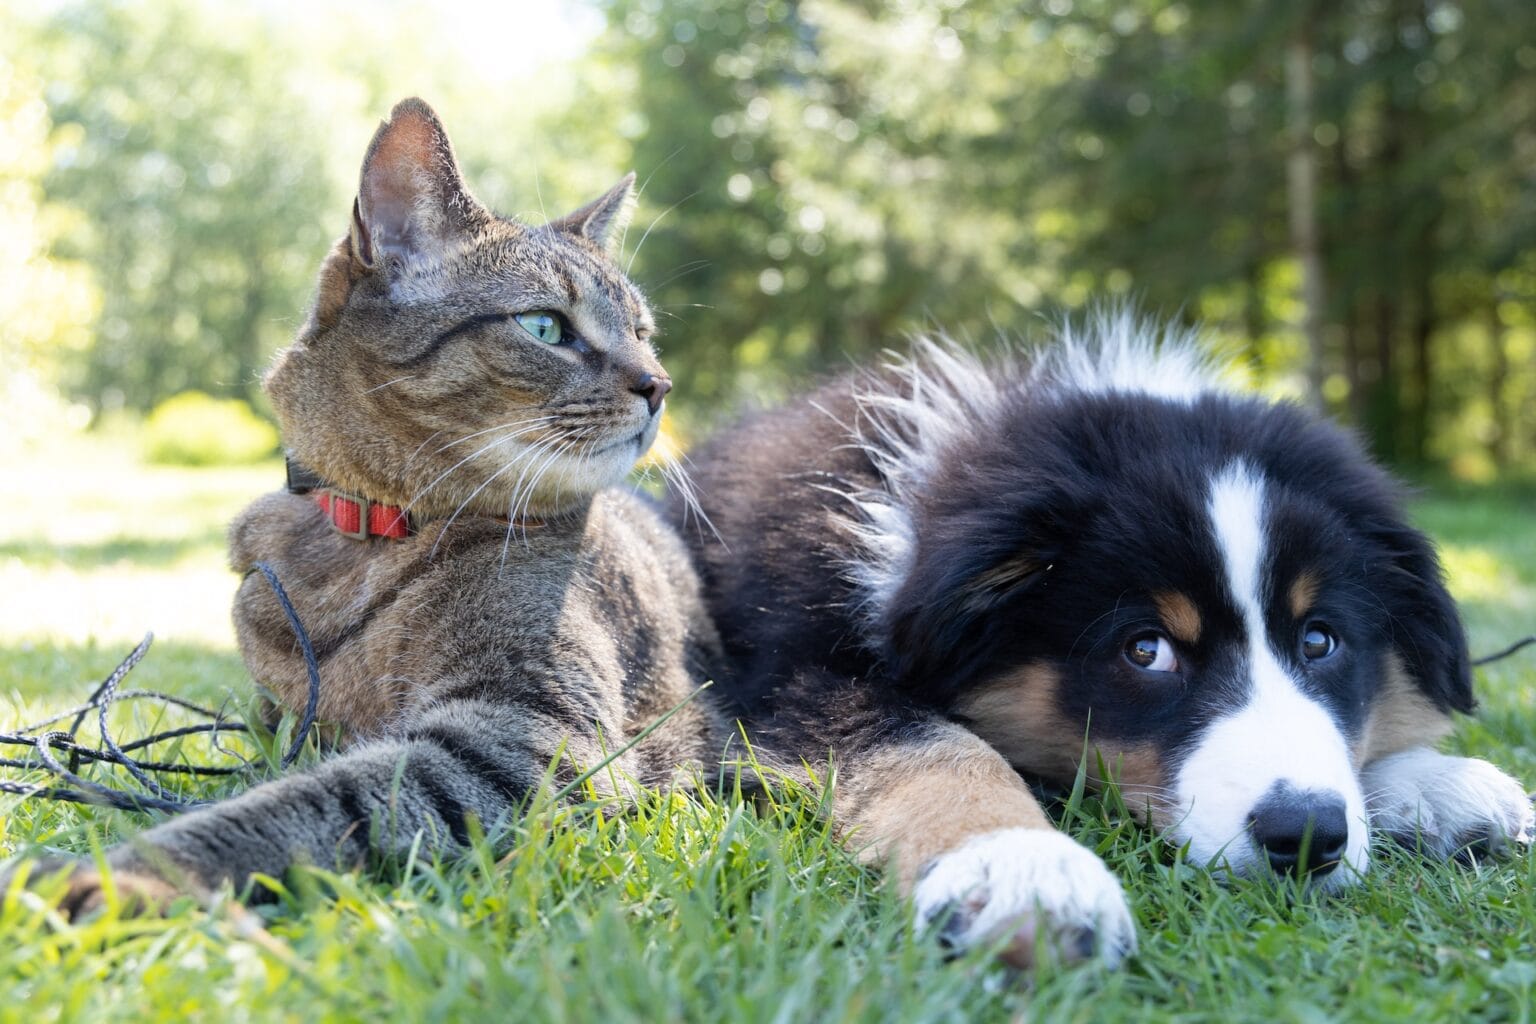 Cat & dog in the grass